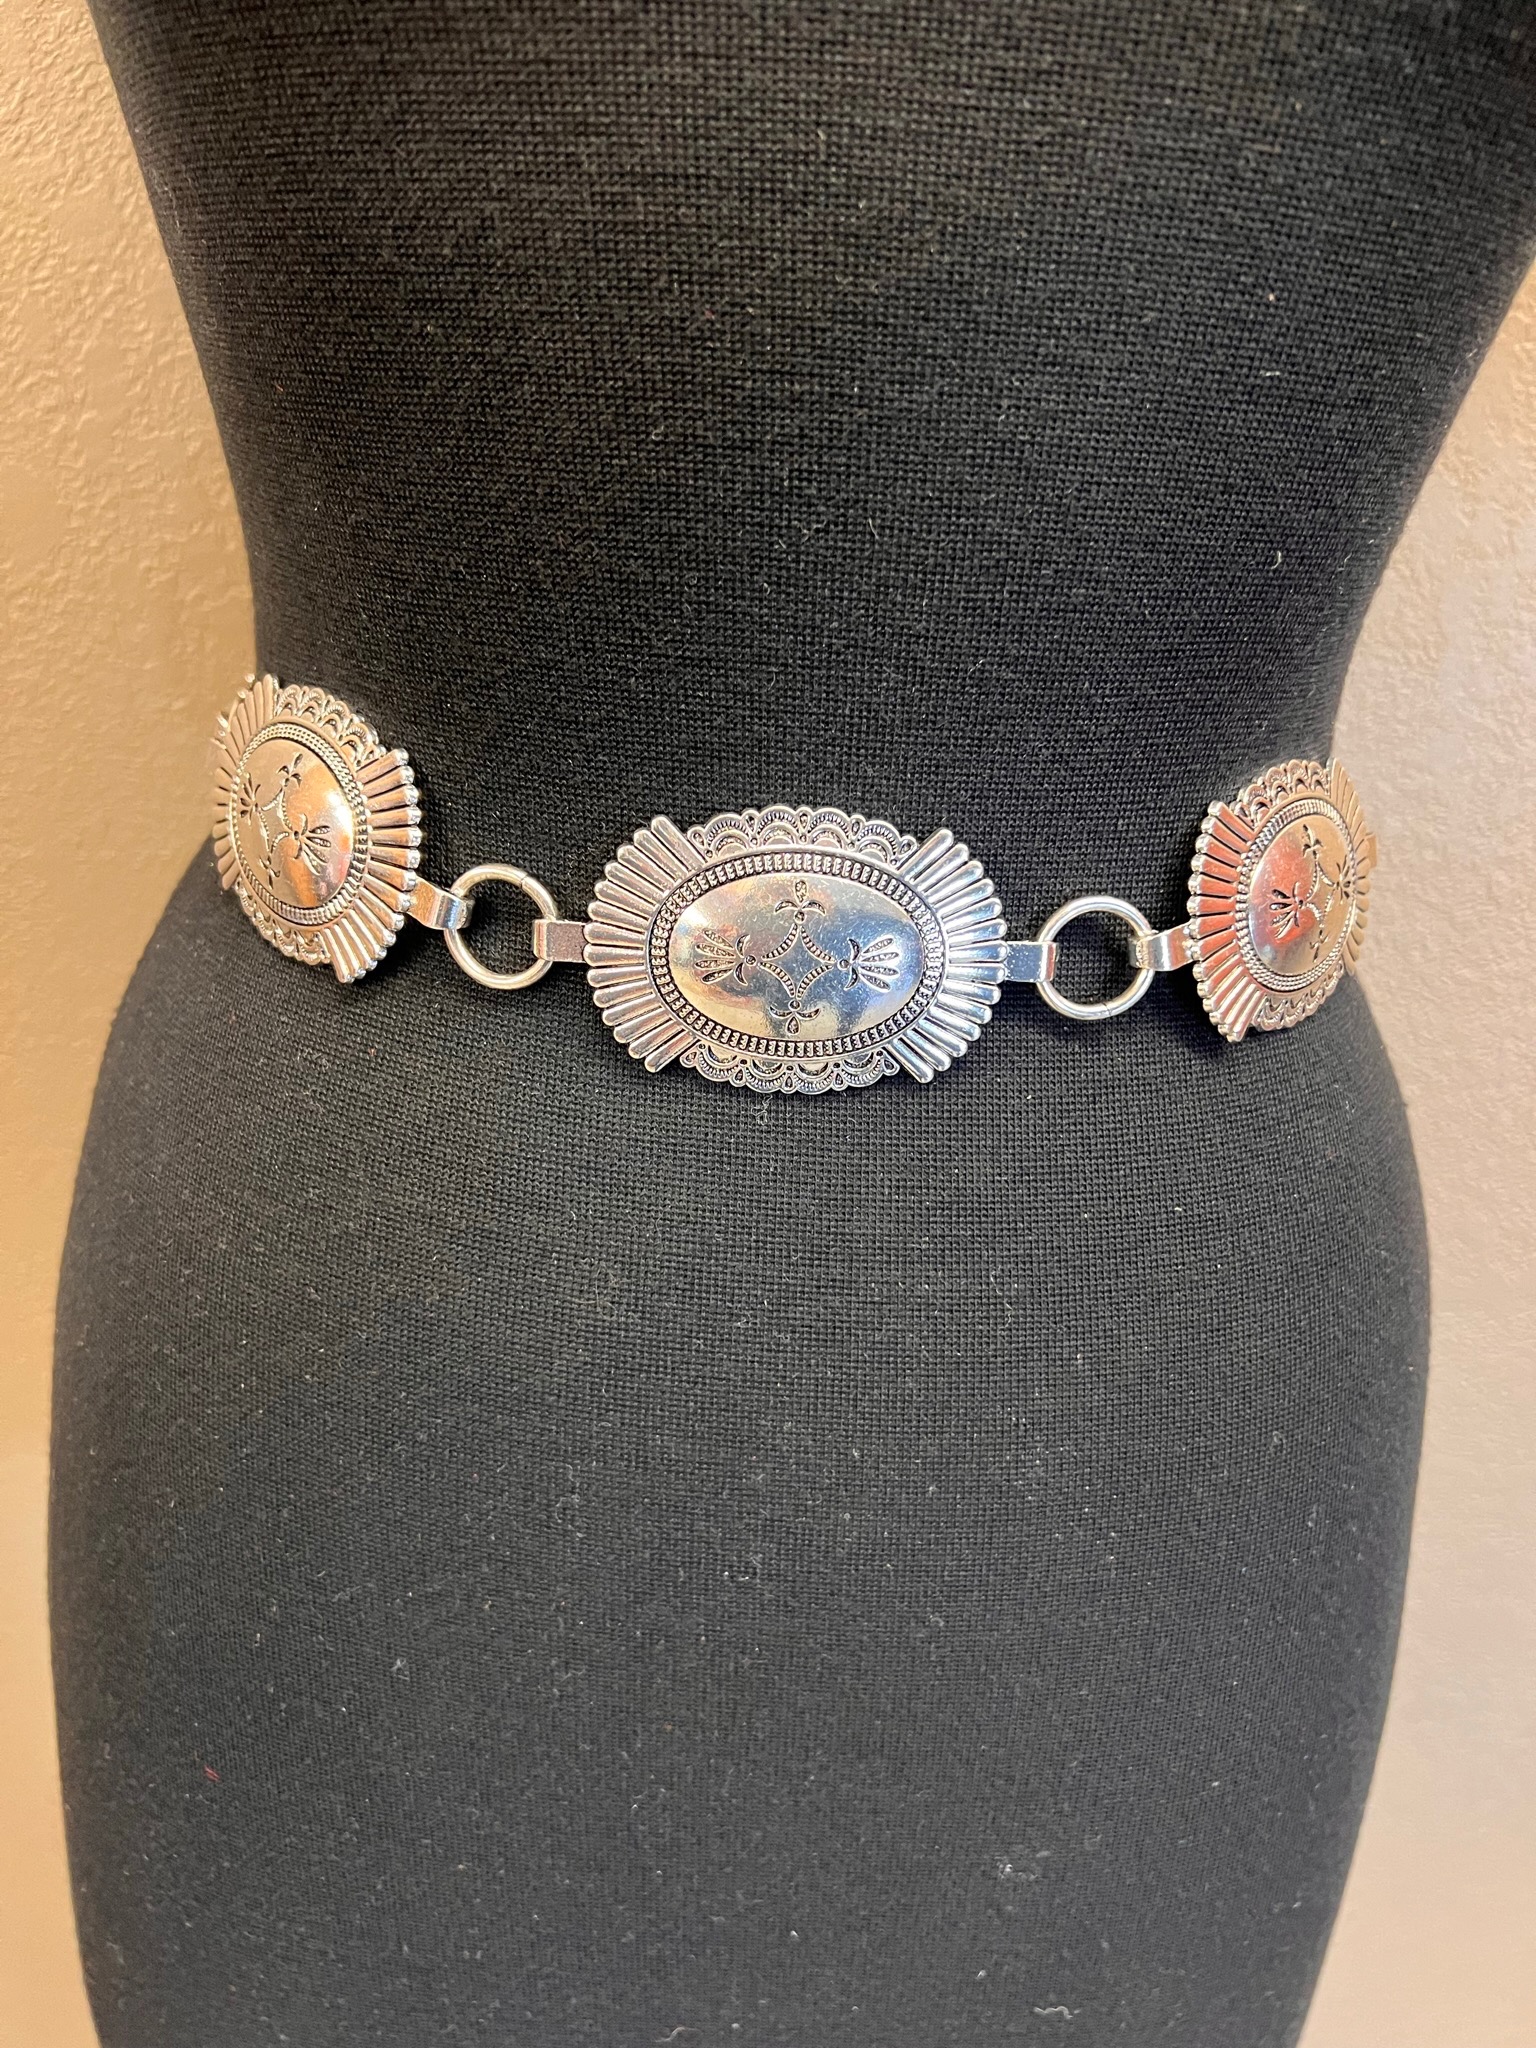 Silver Stamped Concho Belt